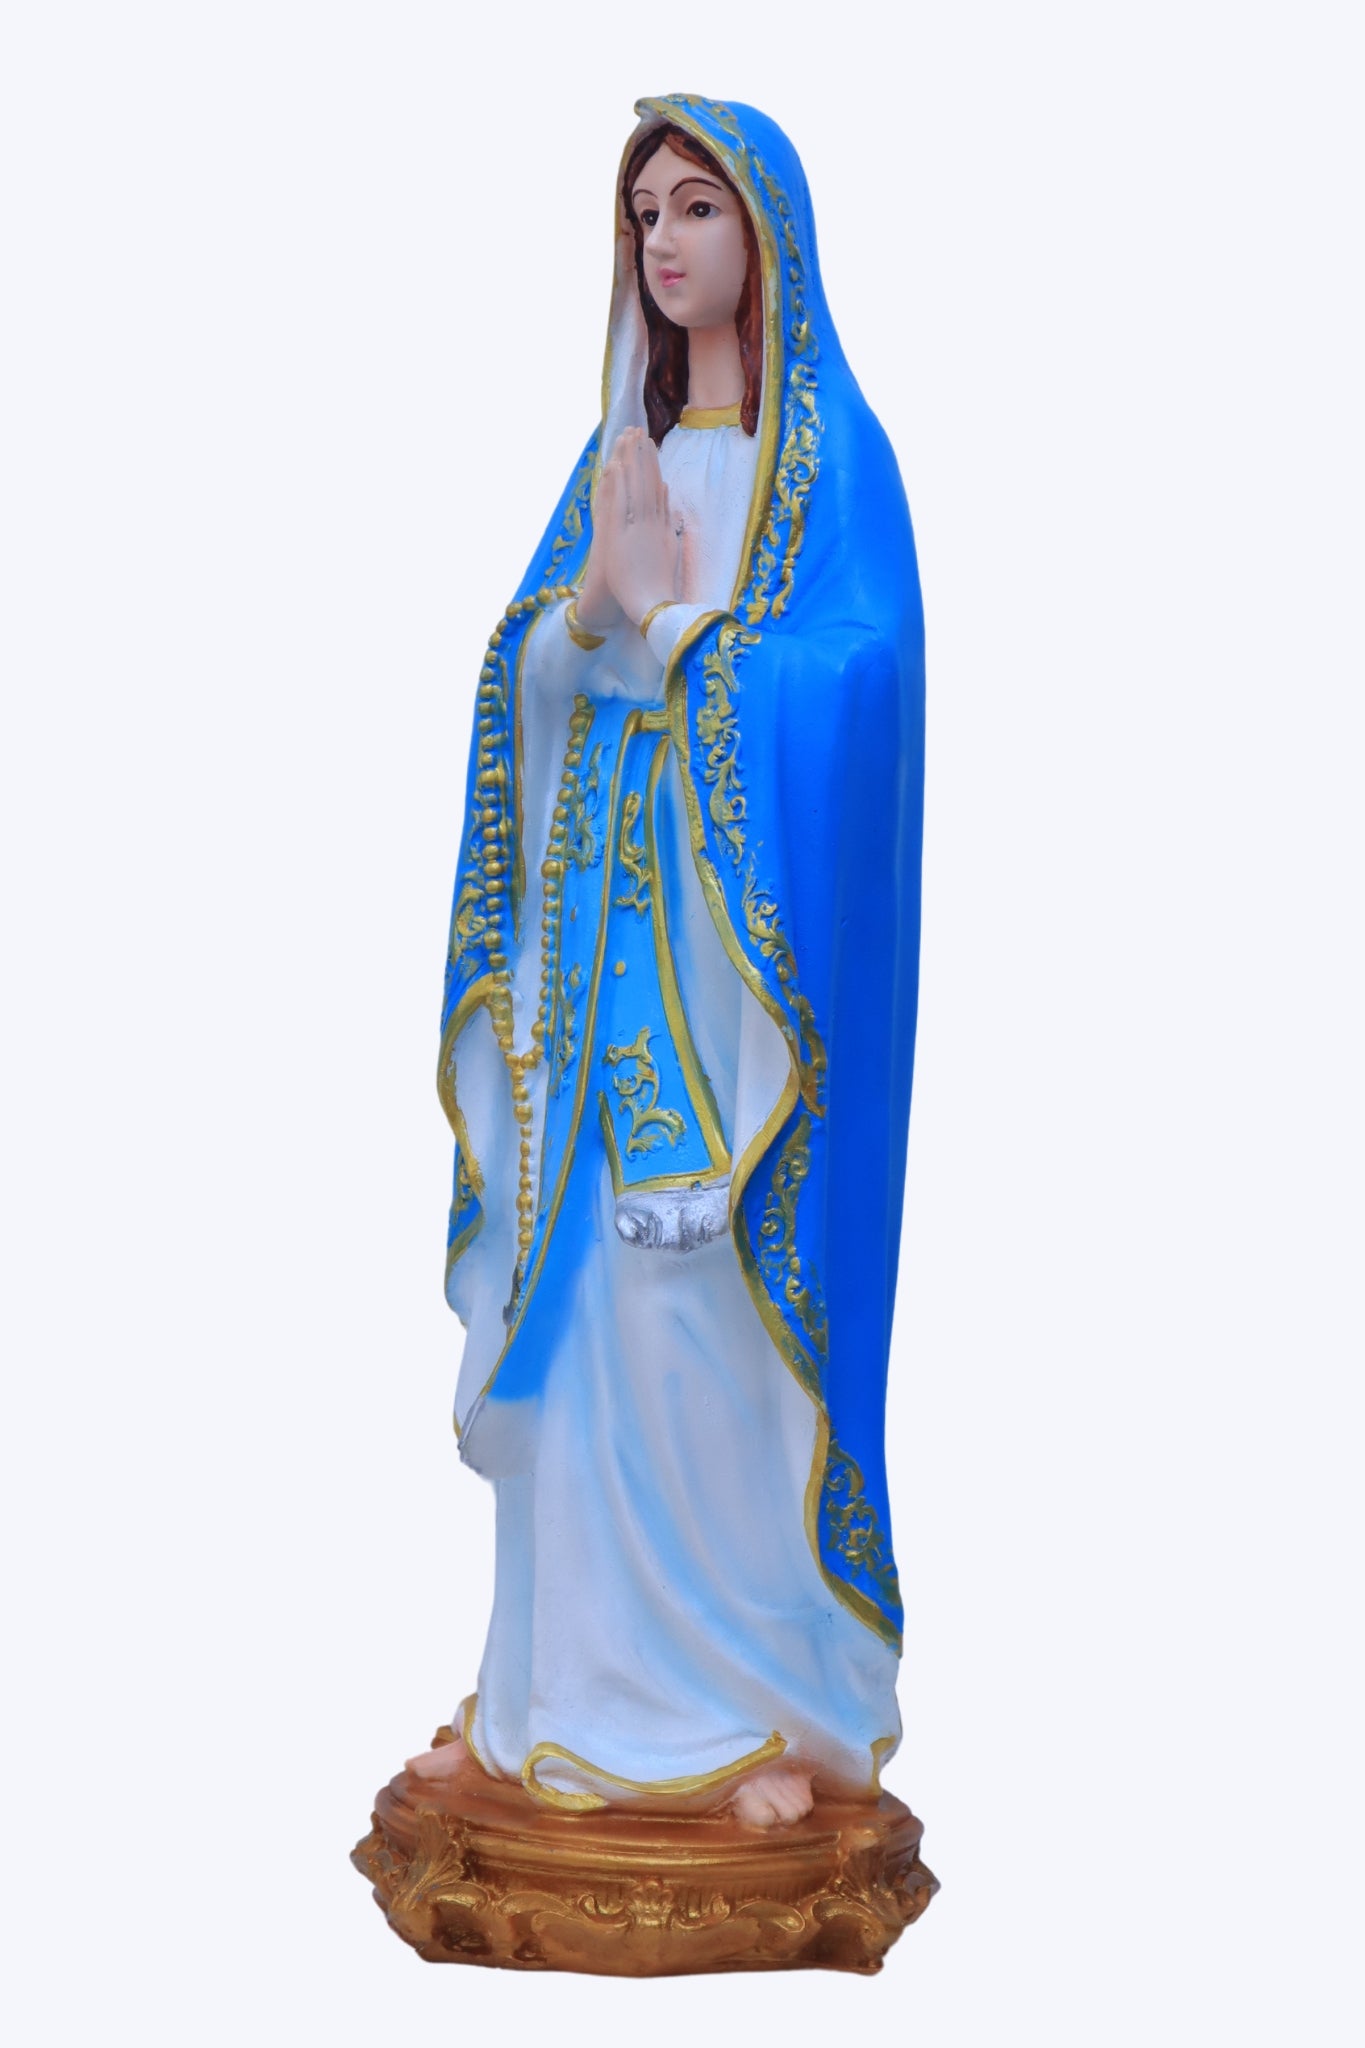 Lady of Lourdes Statue - 18 Inch | Poly Marble Material | Living Words